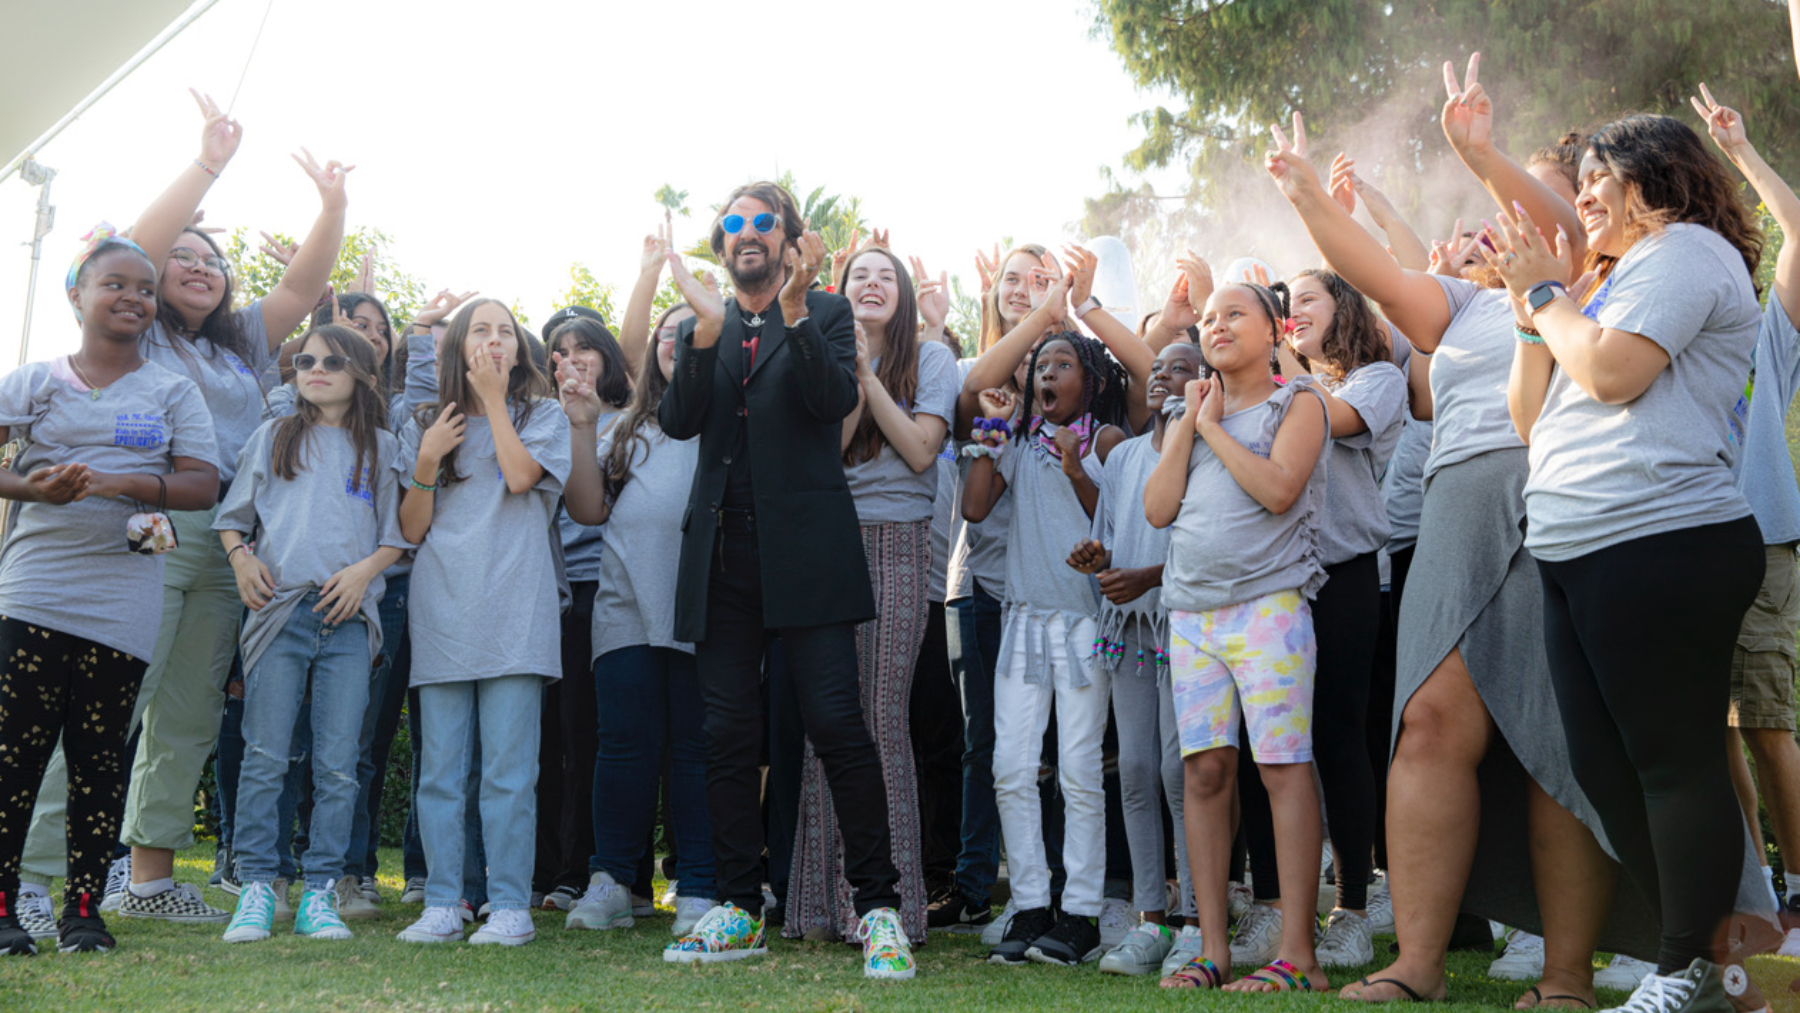 Ringo Starr Sees a Brighter Future in ‘Let’s Change the World’ Video